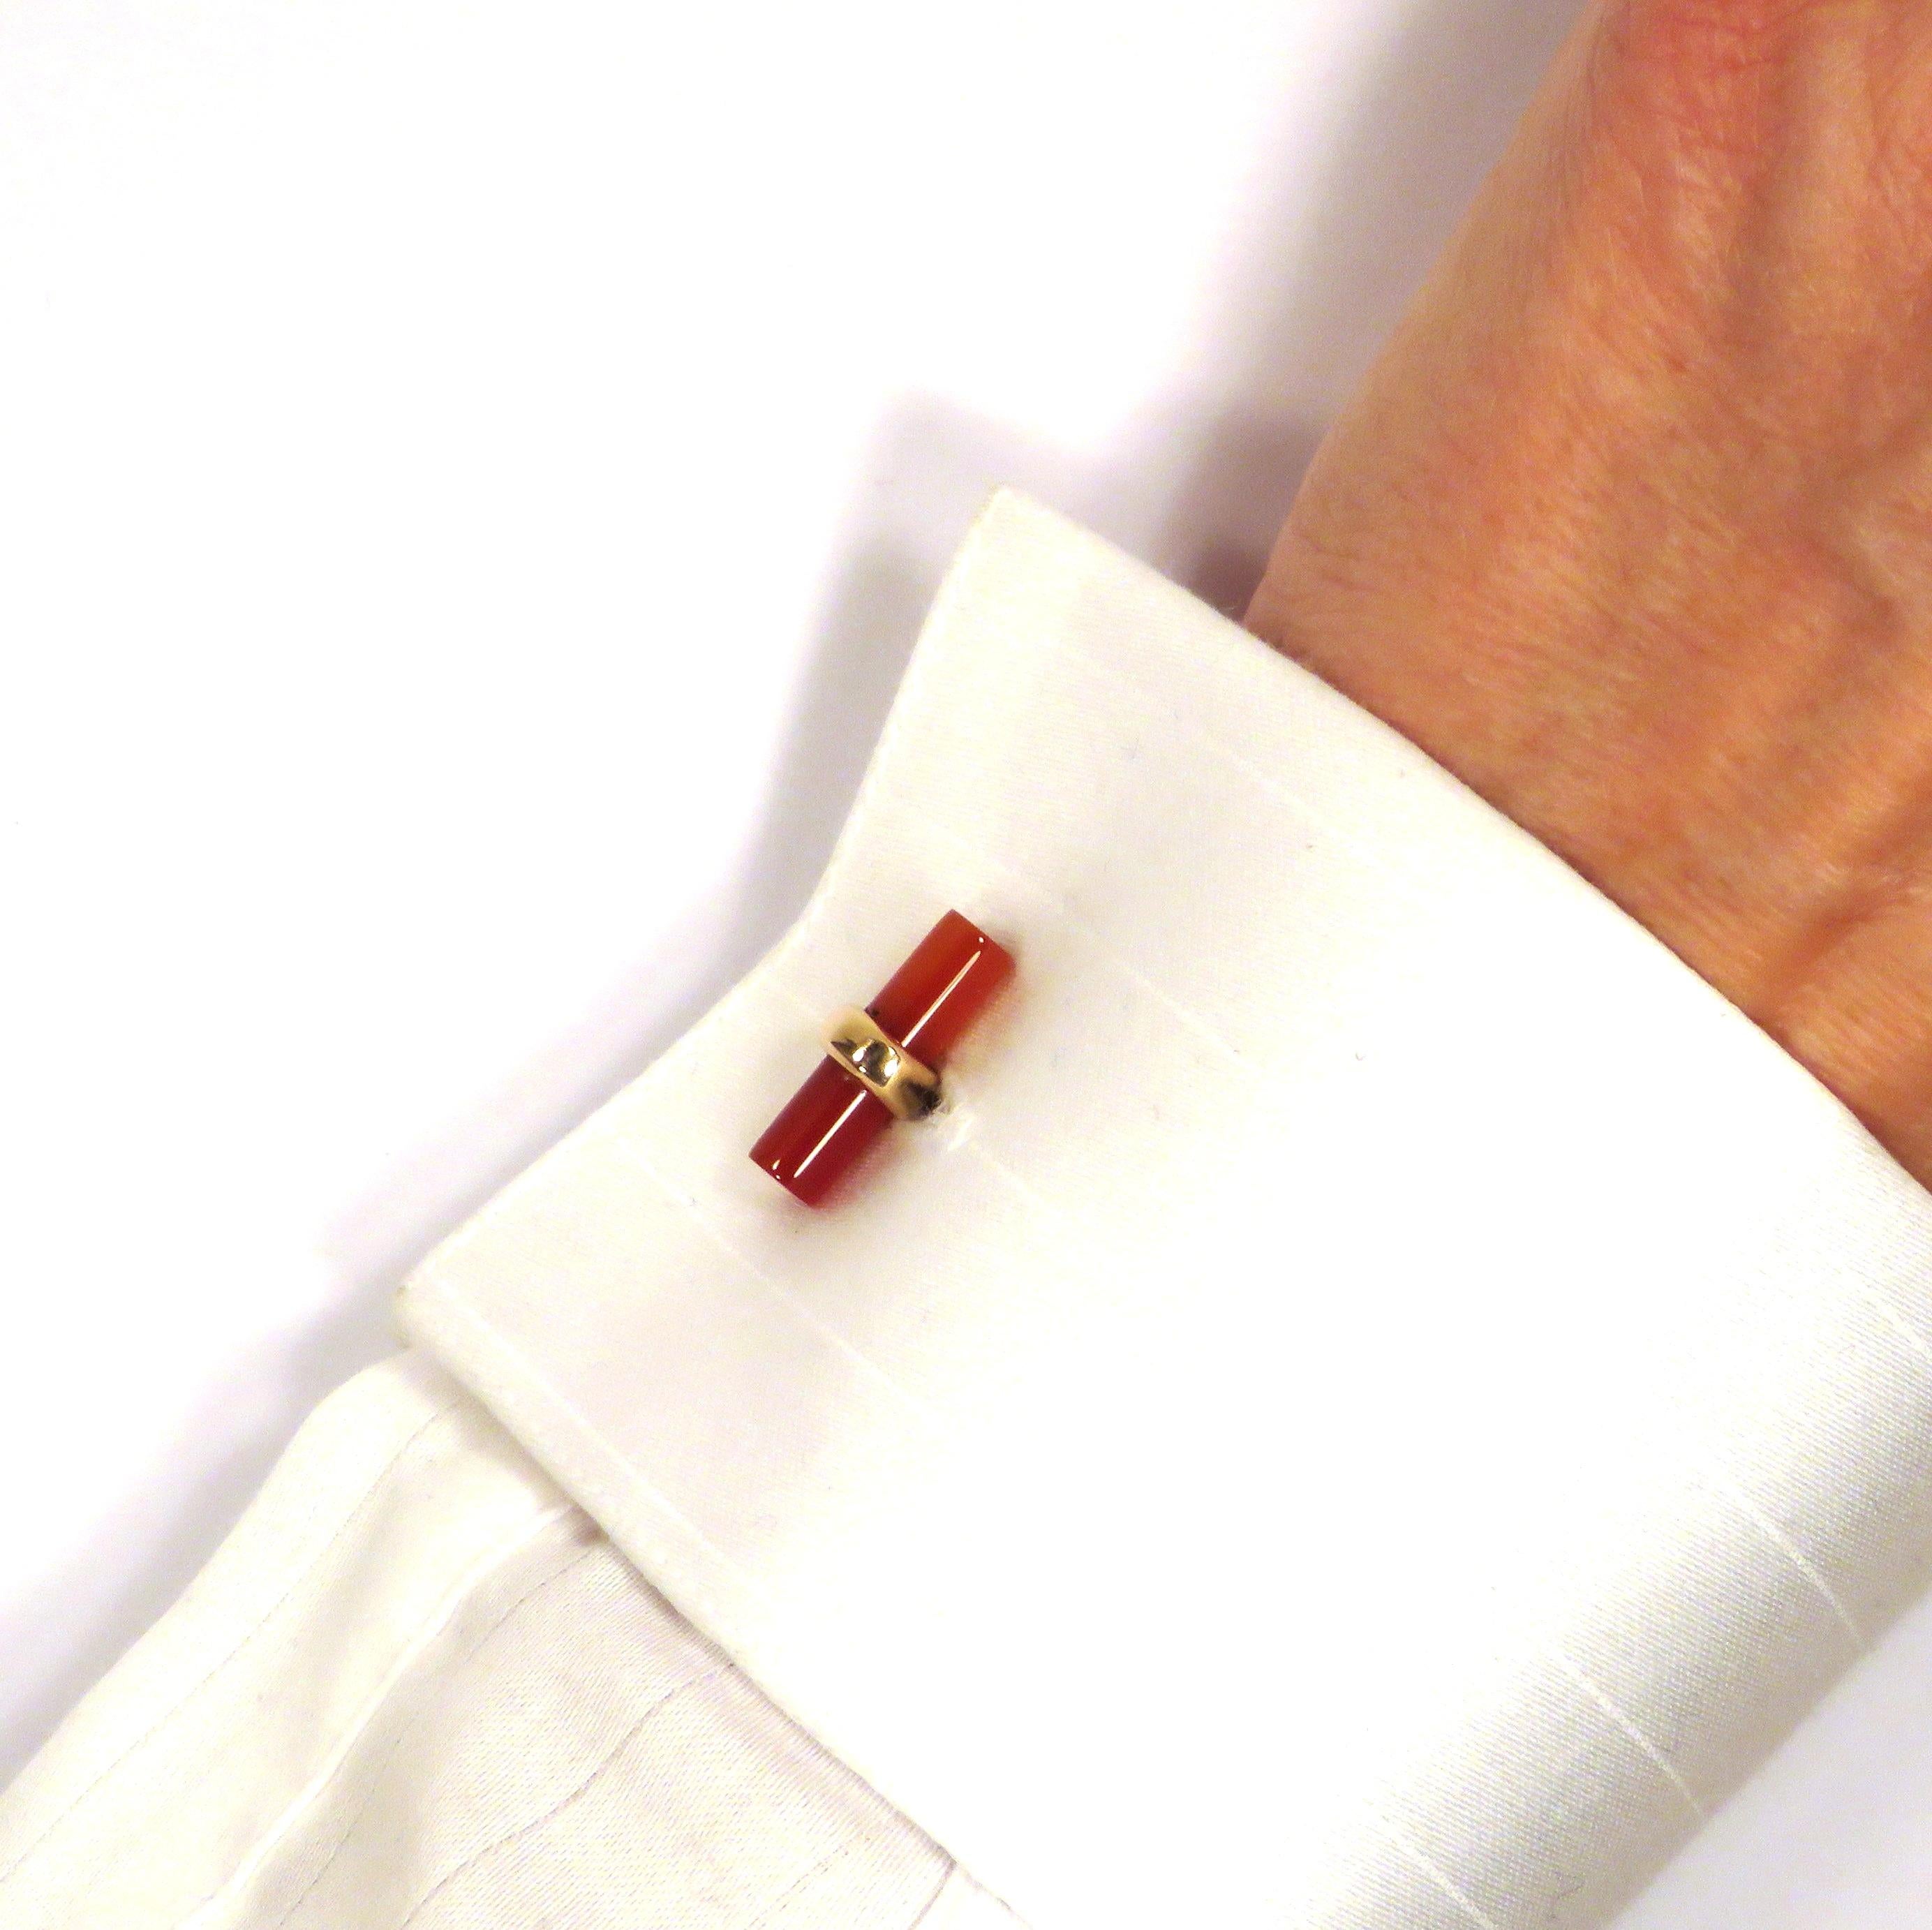 Handmade cufflinks in 9k rose gold featuring four natural red carnelian bars. Gemstones size: length 20 mm - diameter 5 mm / length 0,787 inches - diameter 0,196 inches. They are marked with the Italian Gold Mark 375 and Botta Gioielli brandmark